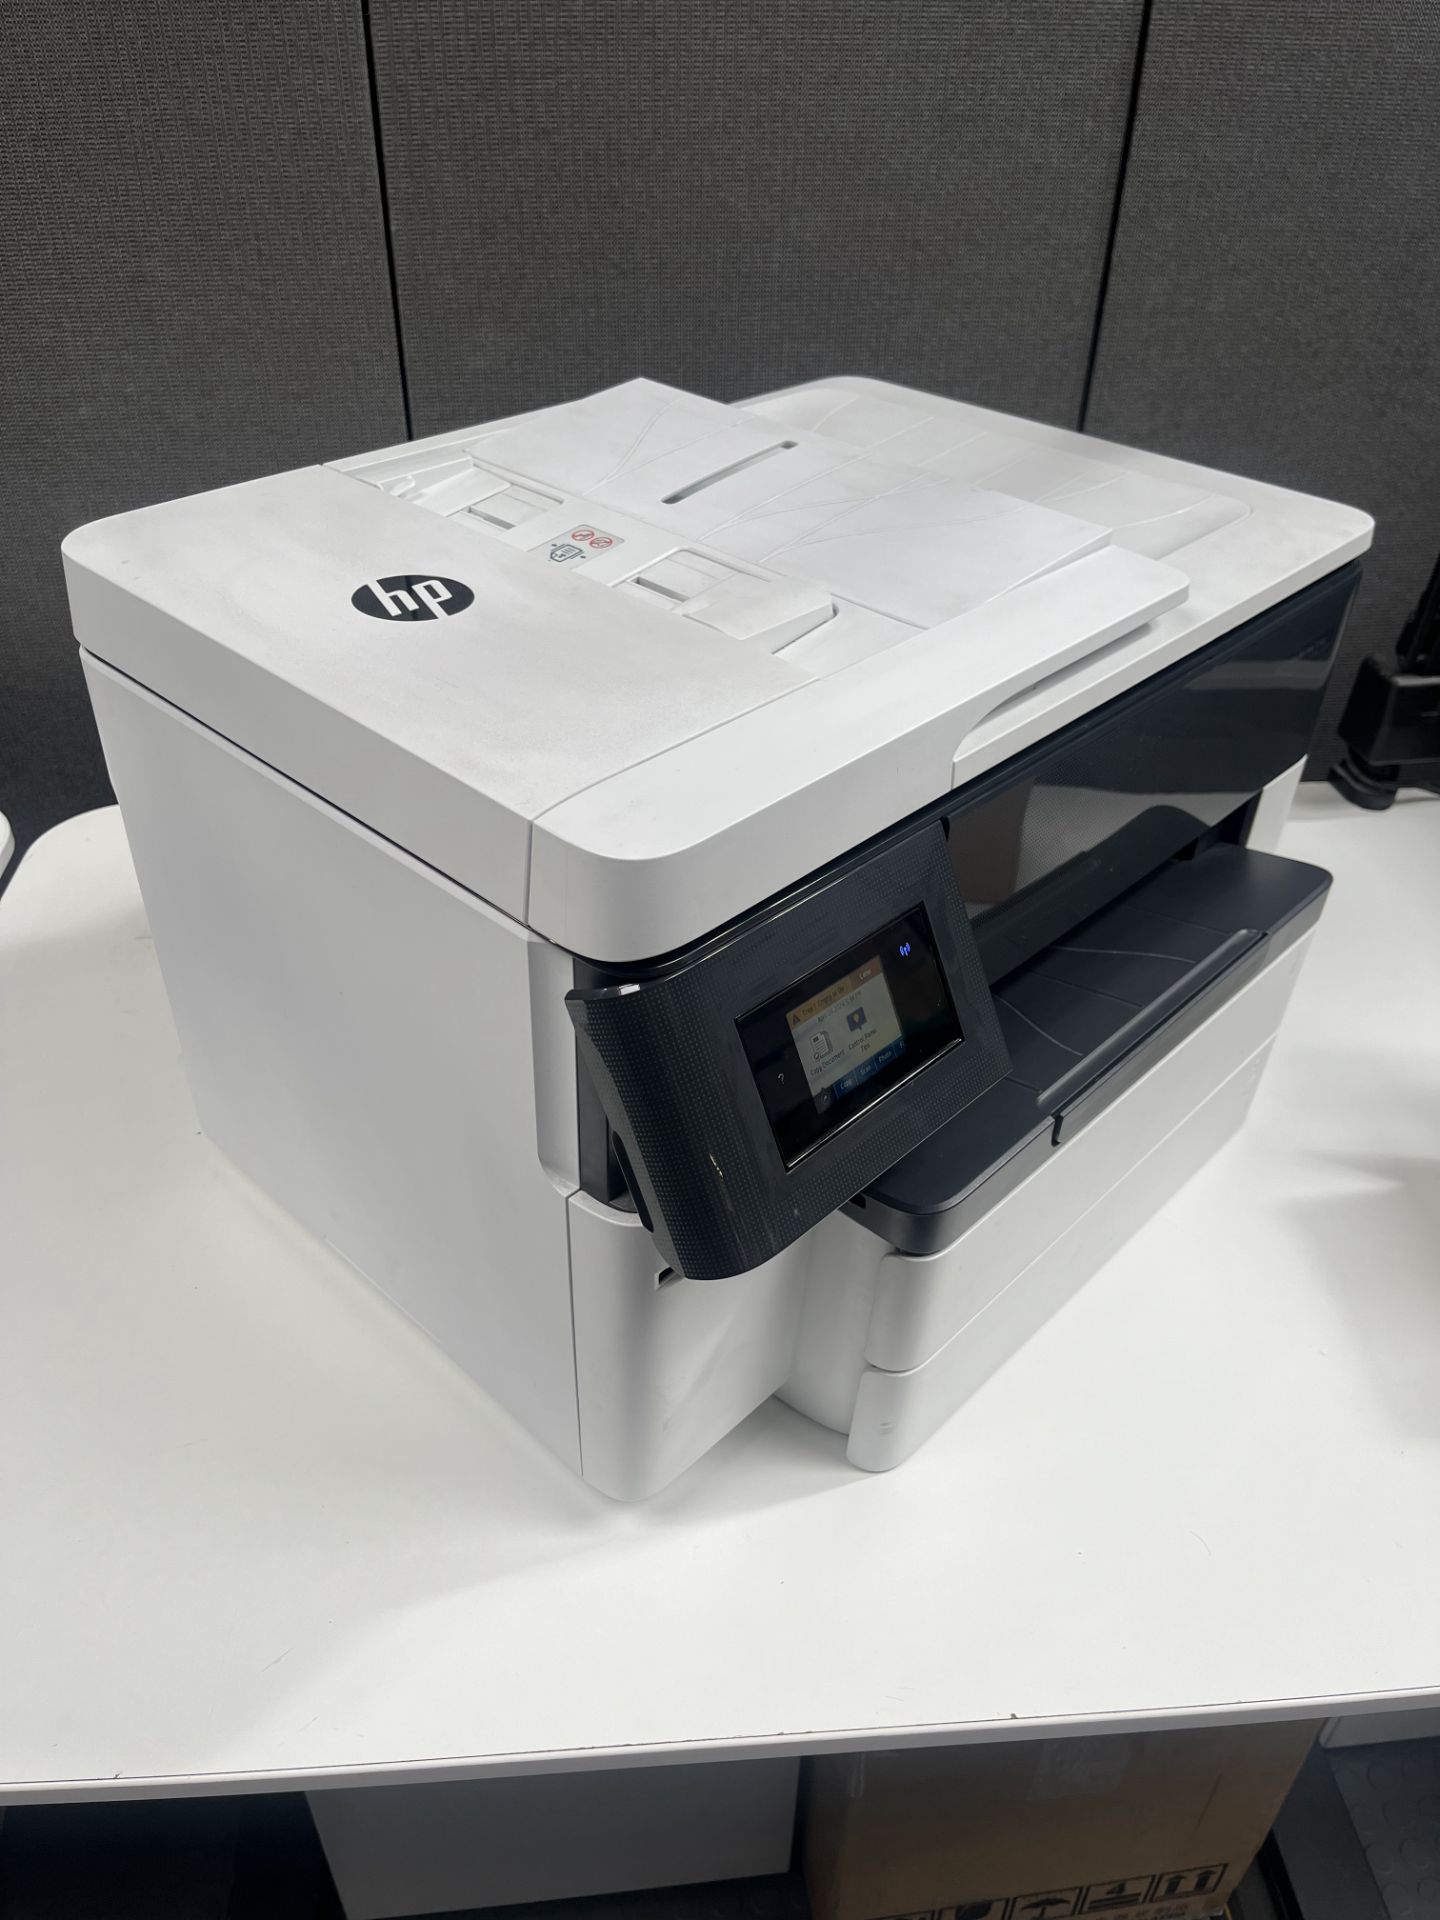 HP OfficeJet Pro 7740, Inkjet Print - Scan - Copy, per customer excellent-fully functional - Image 2 of 5